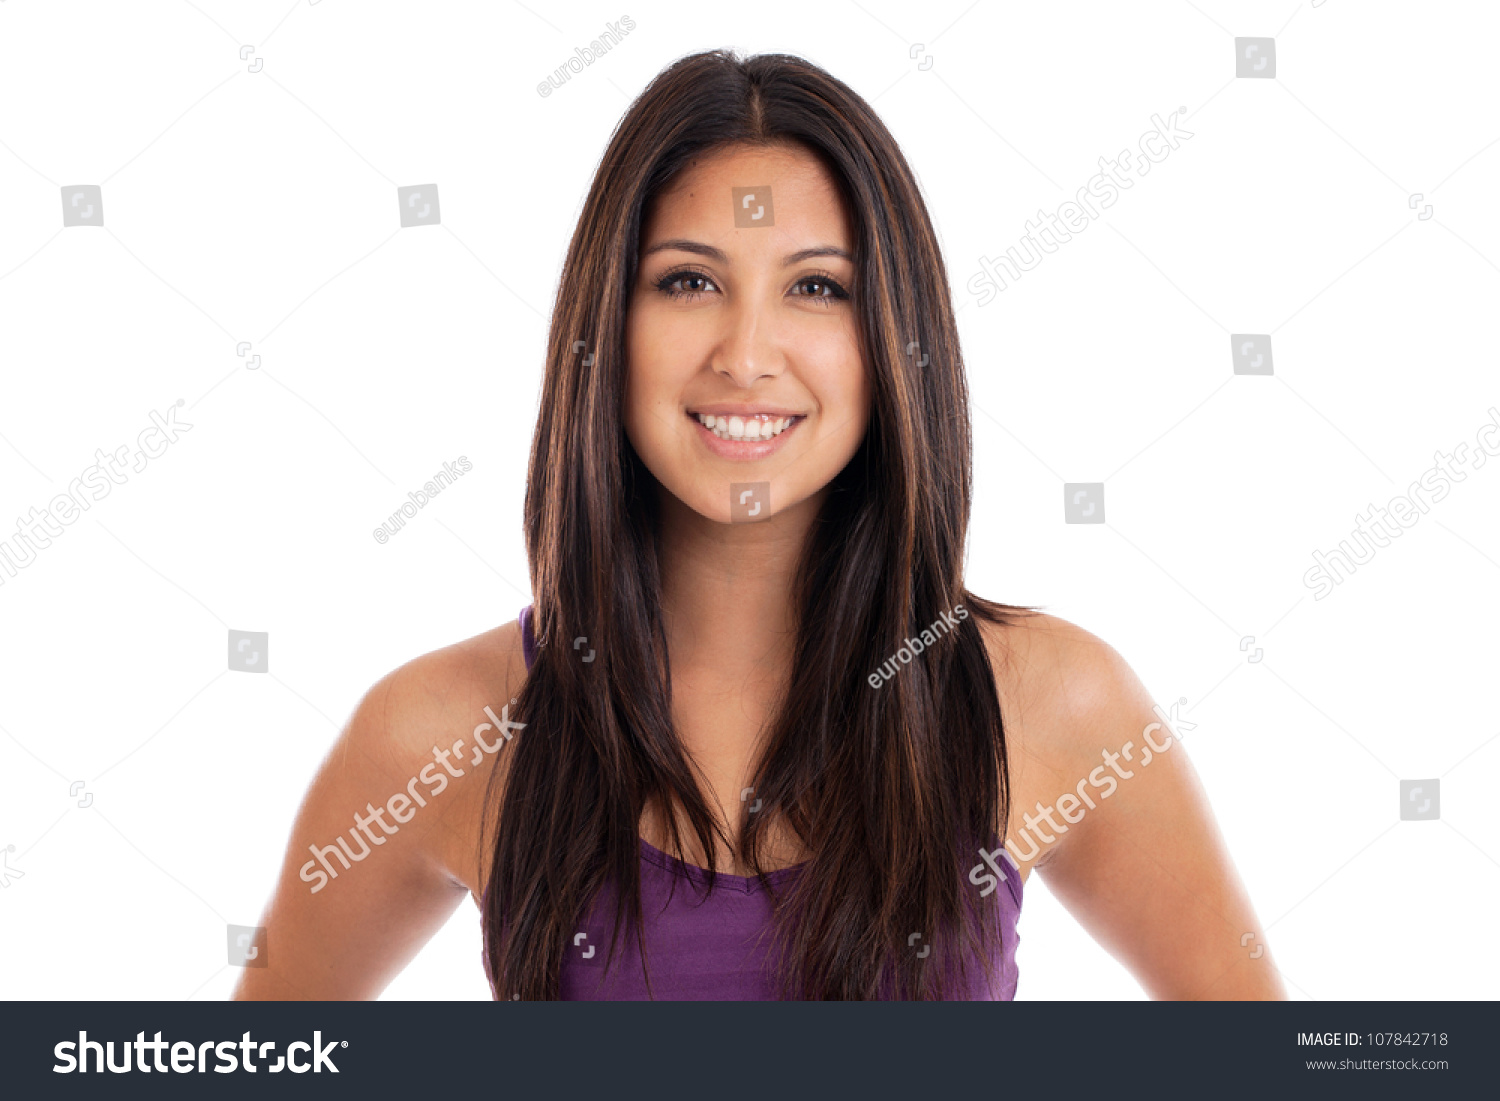 https://image.shutterstock.com/z/stock-photo-beautiful-mixed-race-mexican-and-japanese-woman-portrait-isolated-on-white-107842718.jpg